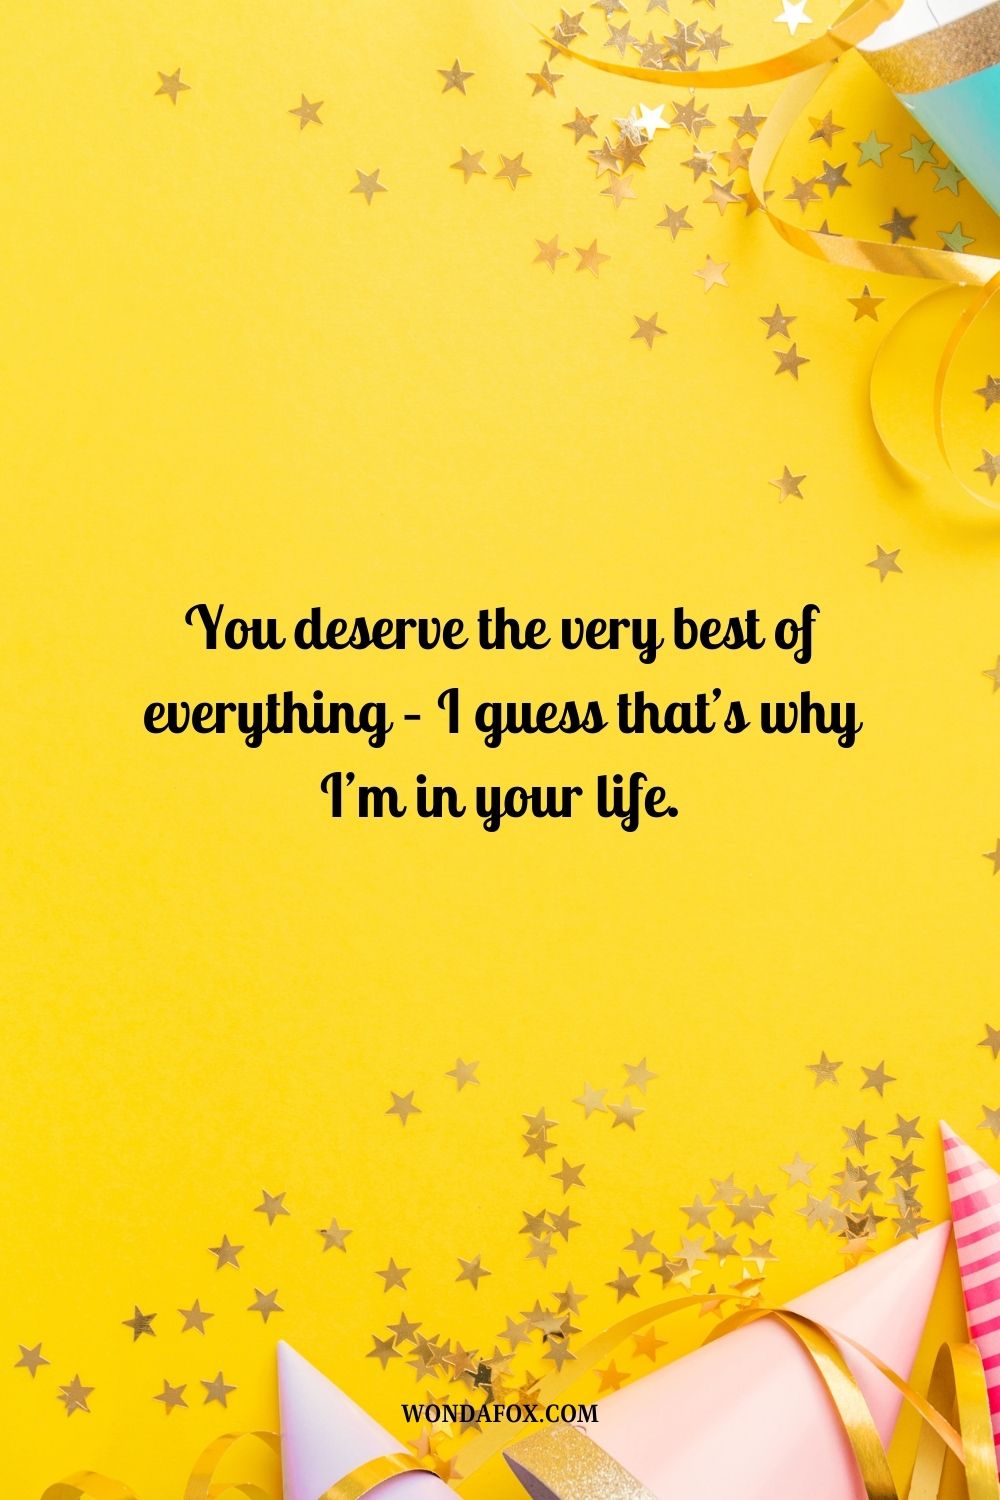 You deserve the very best of everything – I guess that’s why I’m in your life.